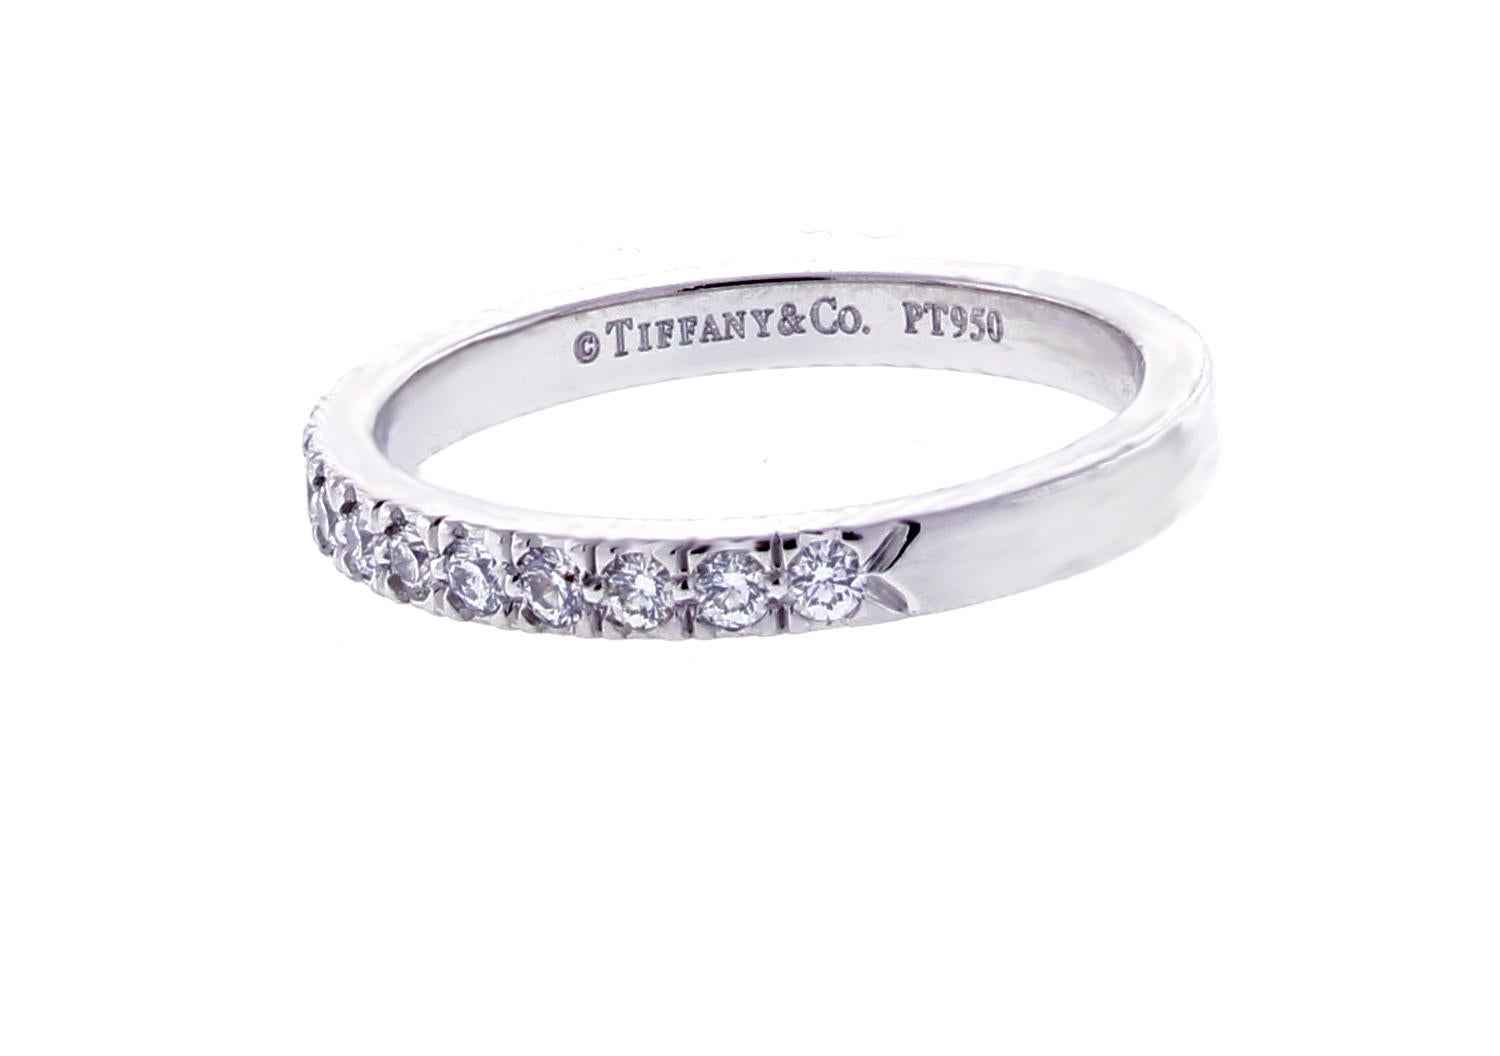 From Tiffany & Co.'s Soleste collection a half circle of shimmering diamonds in a platinum 2mm band ring. The 16 diamonds weigh .23 carats, F-G color, VVS. Size  4¾
This Tiffany Novo ring retails for $2250